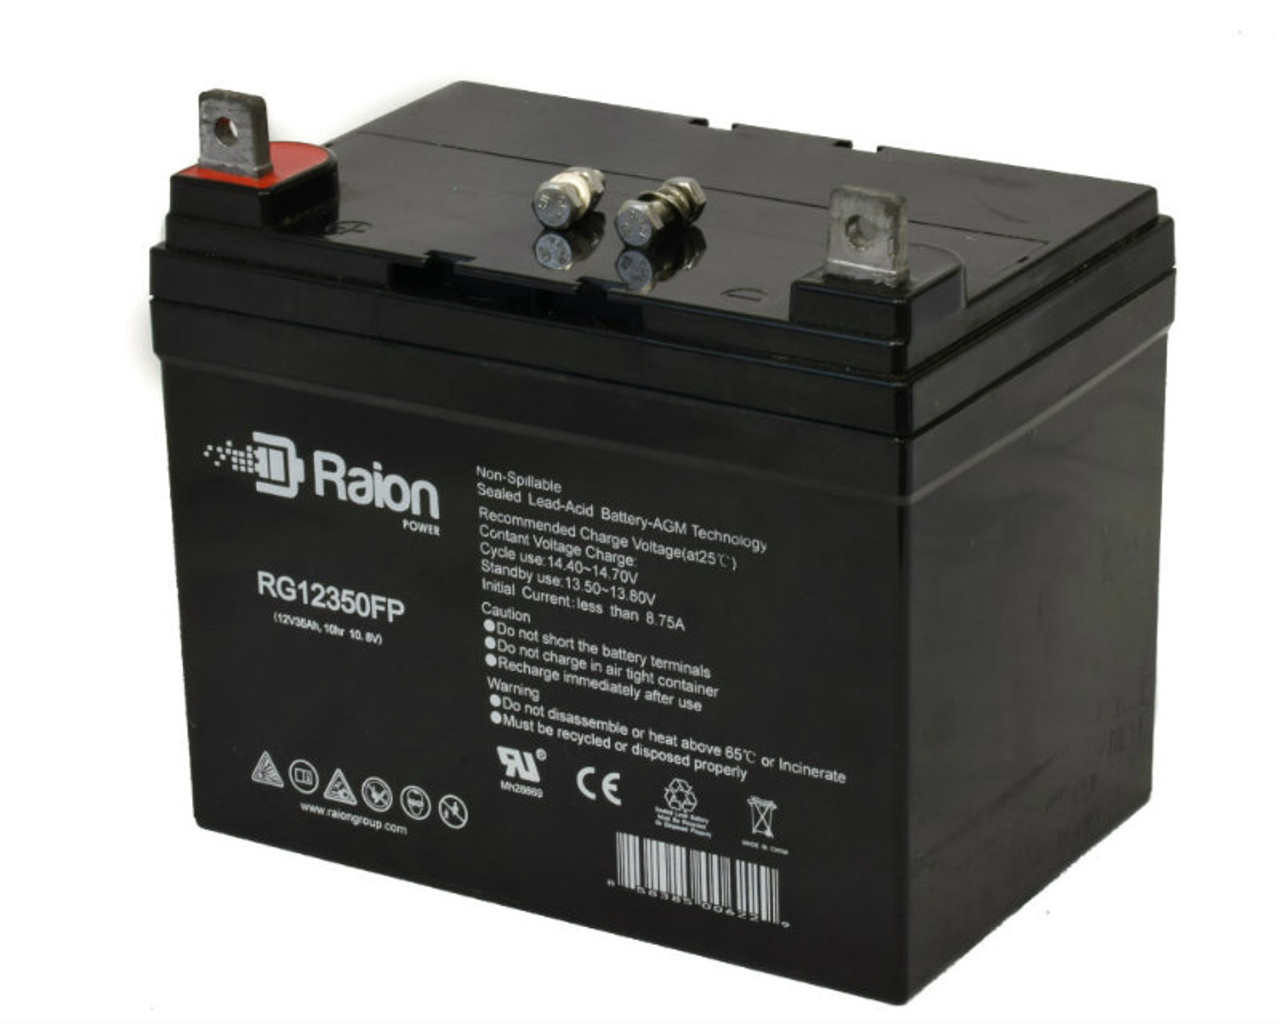 Raion Power Replacement 12V 35Ah Battery for Gould PD12270 - 1 Pack